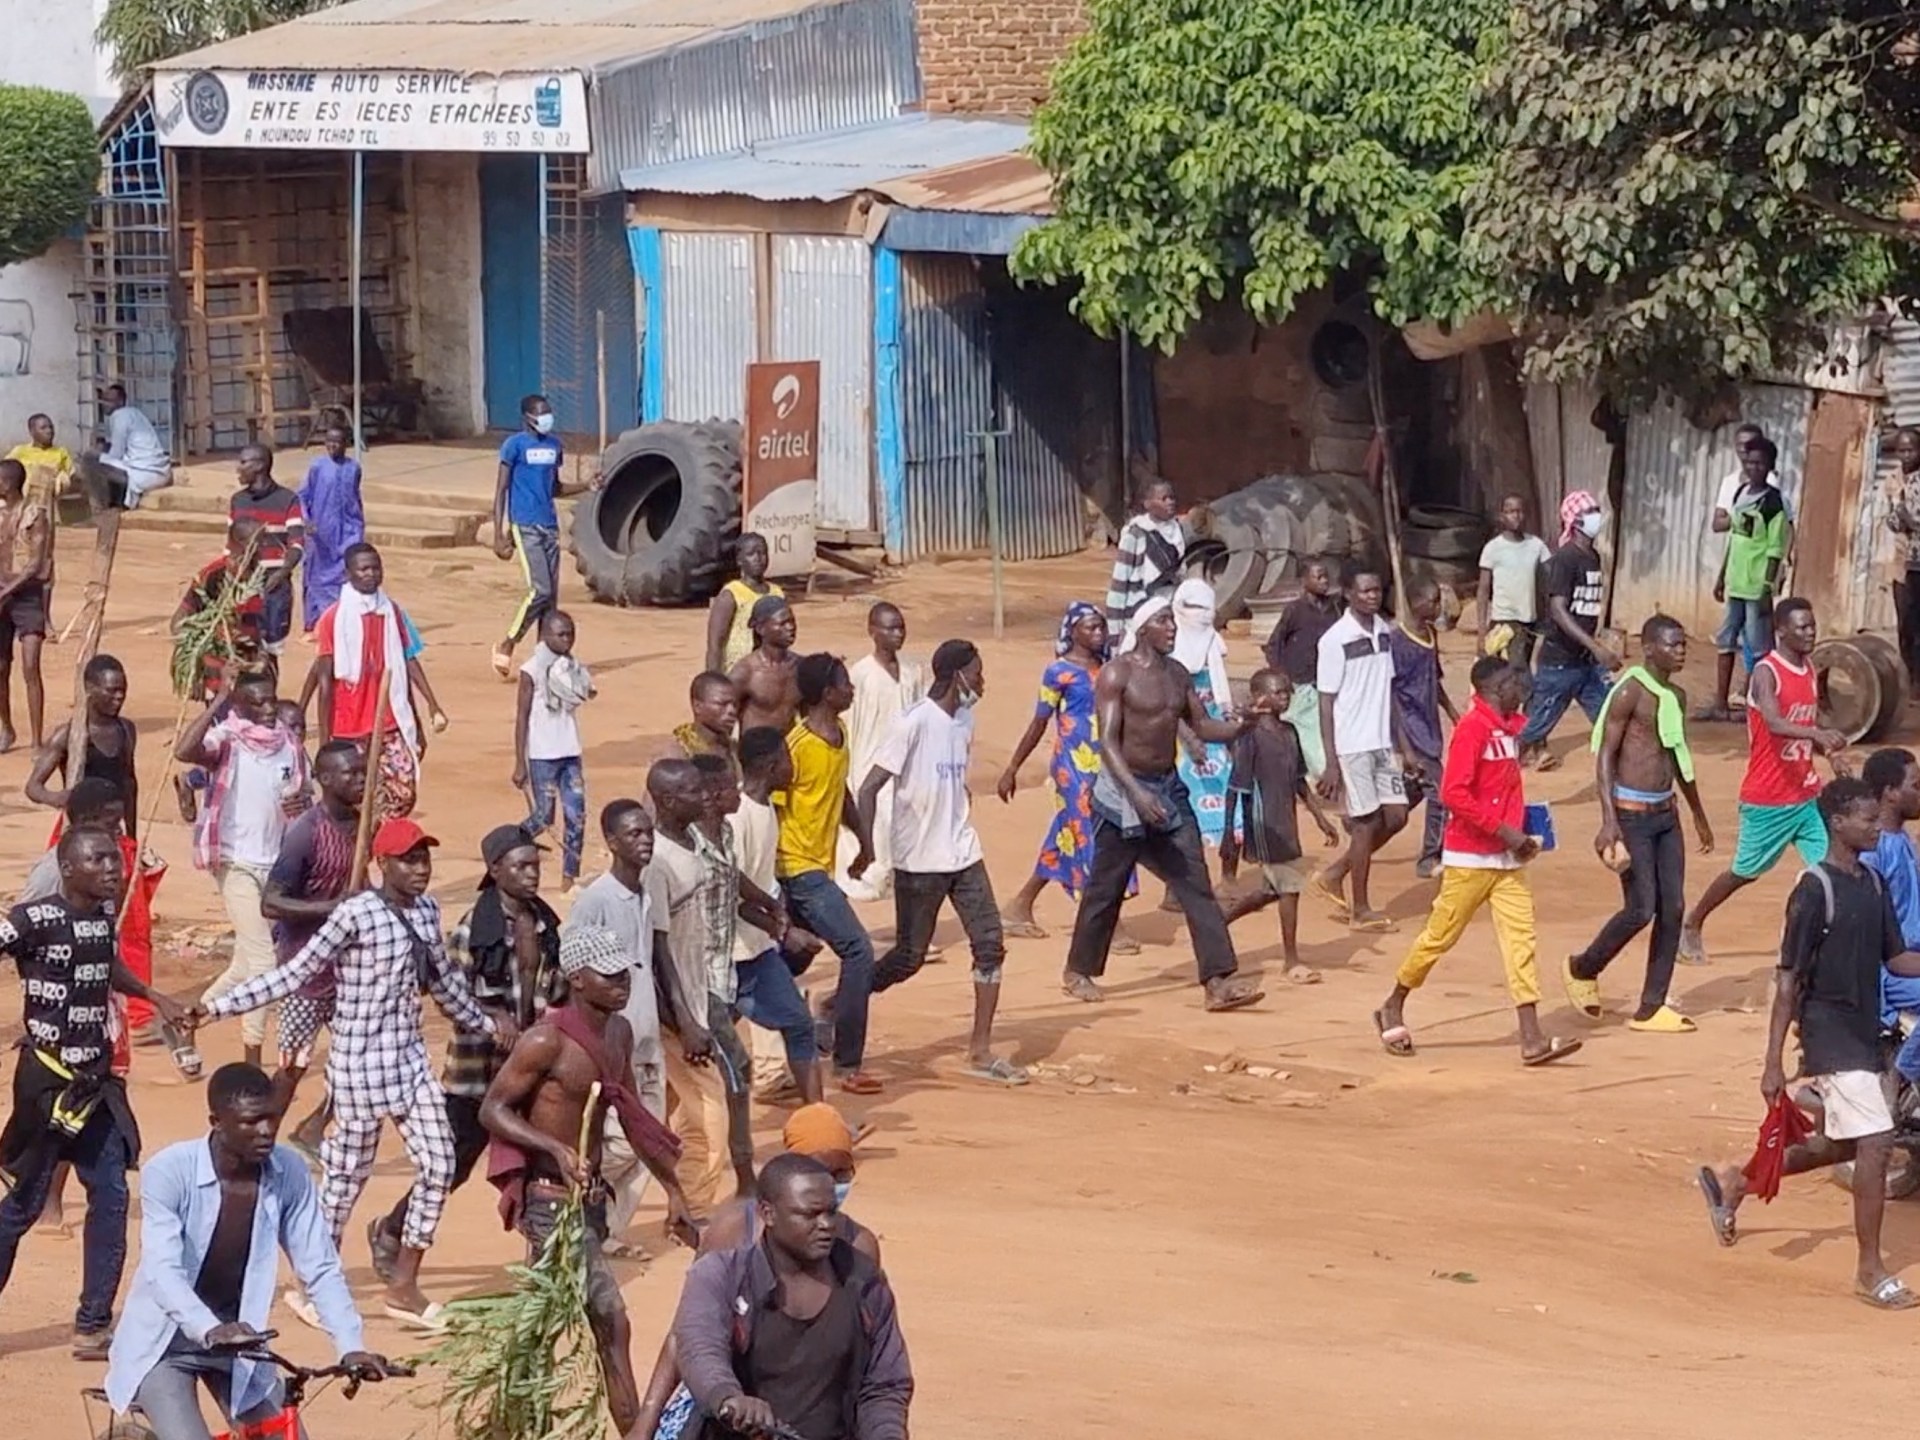 dozens-killed-in-chad-after-protesters-demand-civilian-rule